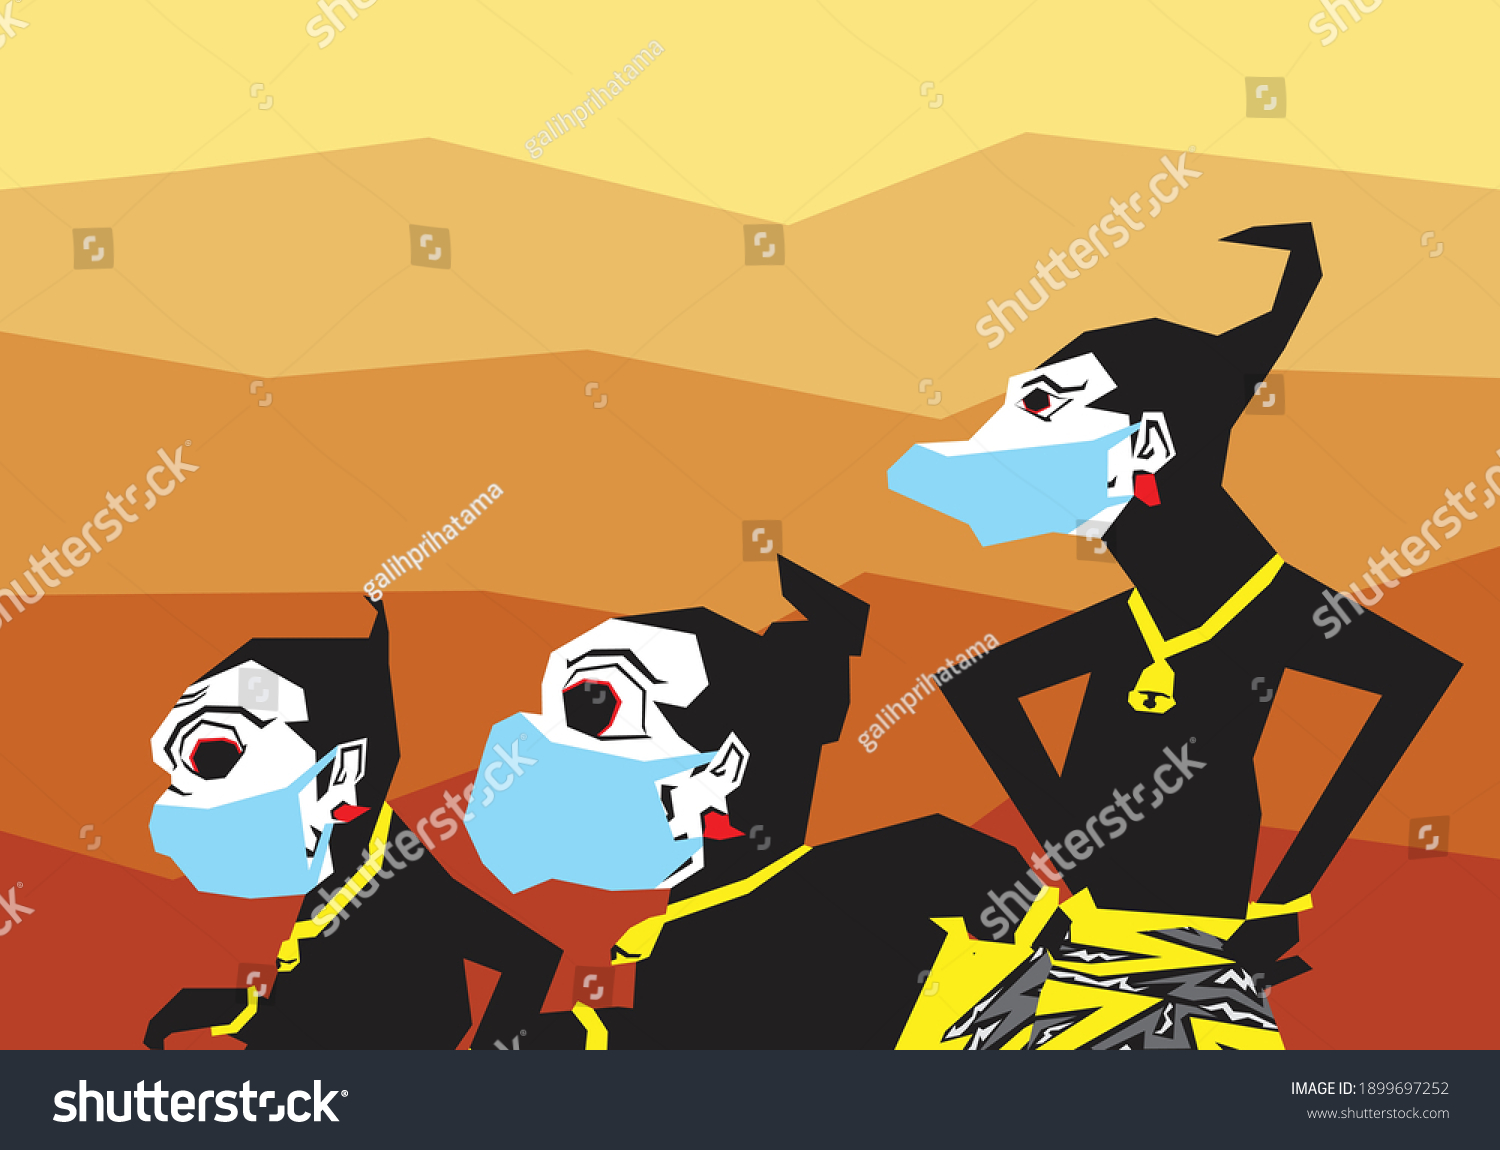 SVG of An illustration of member from Punakawan, Gareng, Bagong and Petruk are wearing mask. Punakawan figures is very well known in the world of Wayang, one of Indonesia's unique traditions. svg